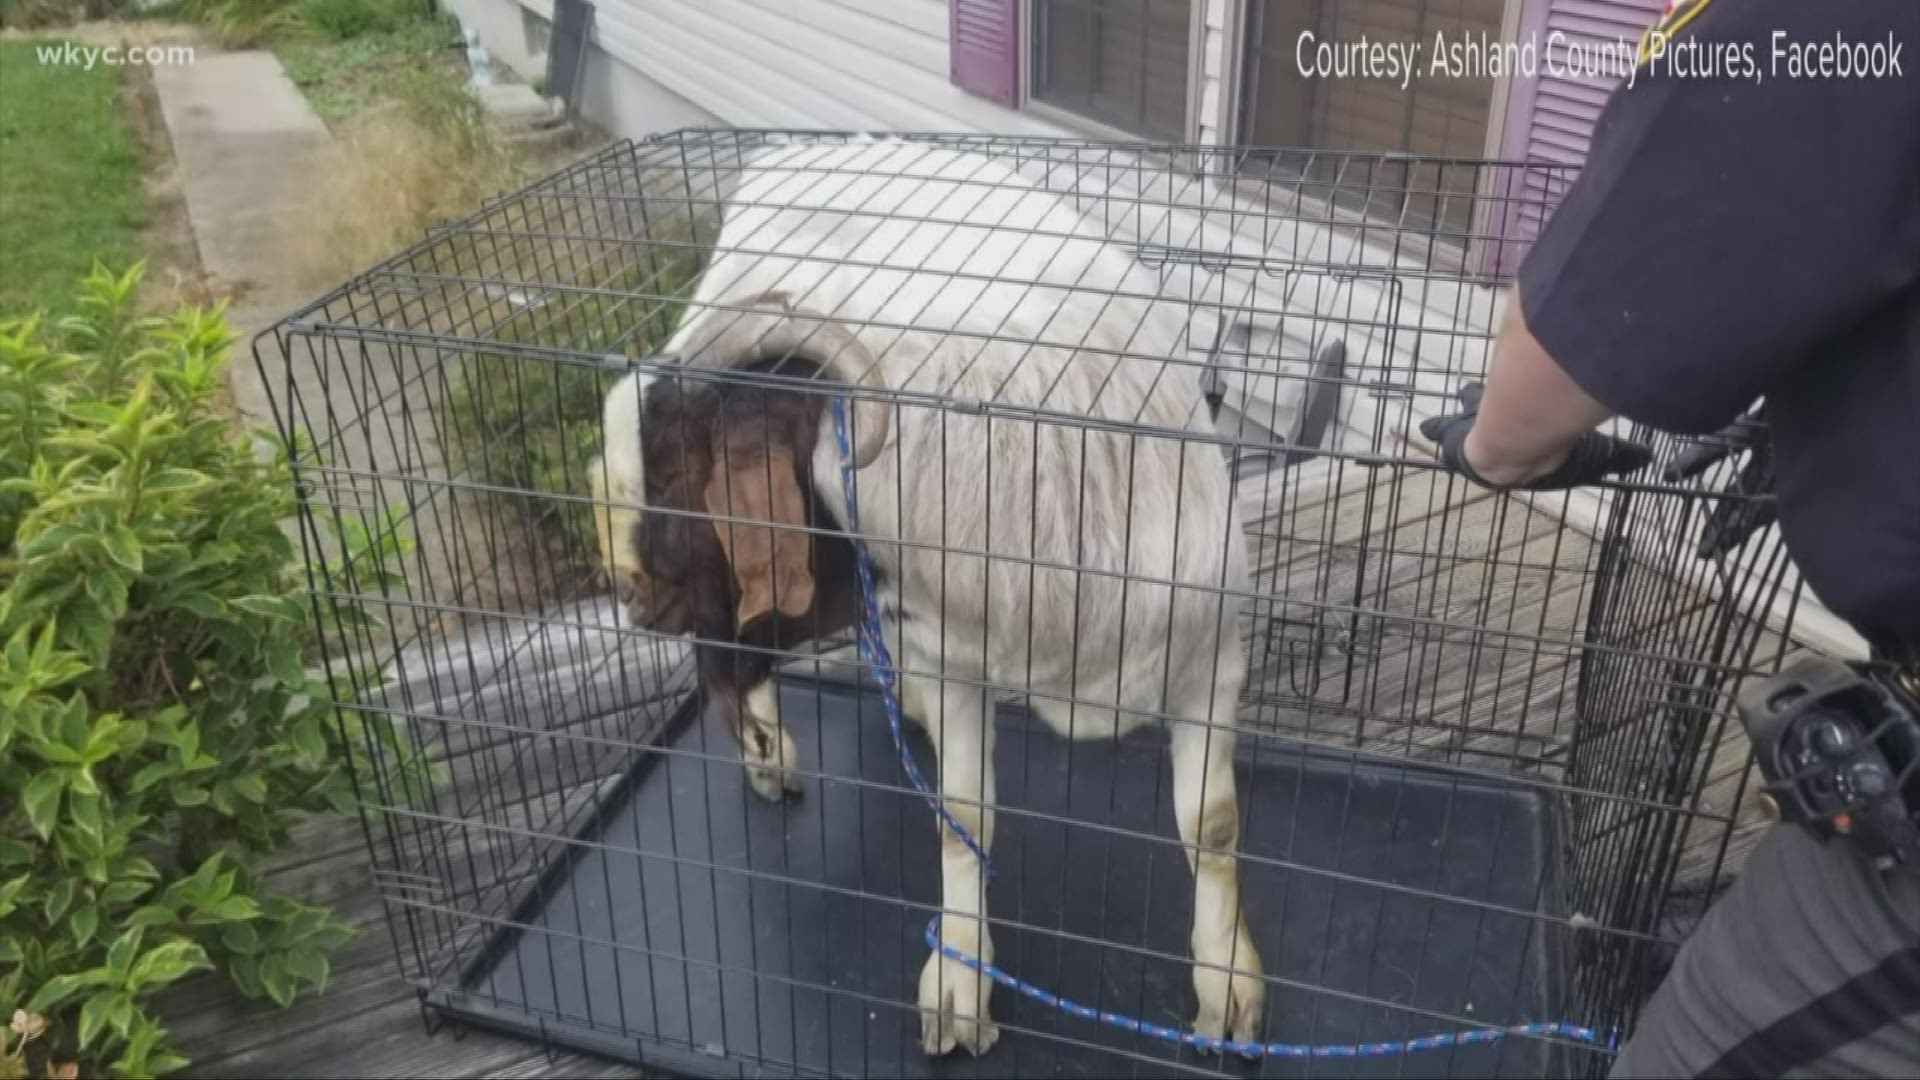 Ashland County resident finds goat asleep in her bathroom